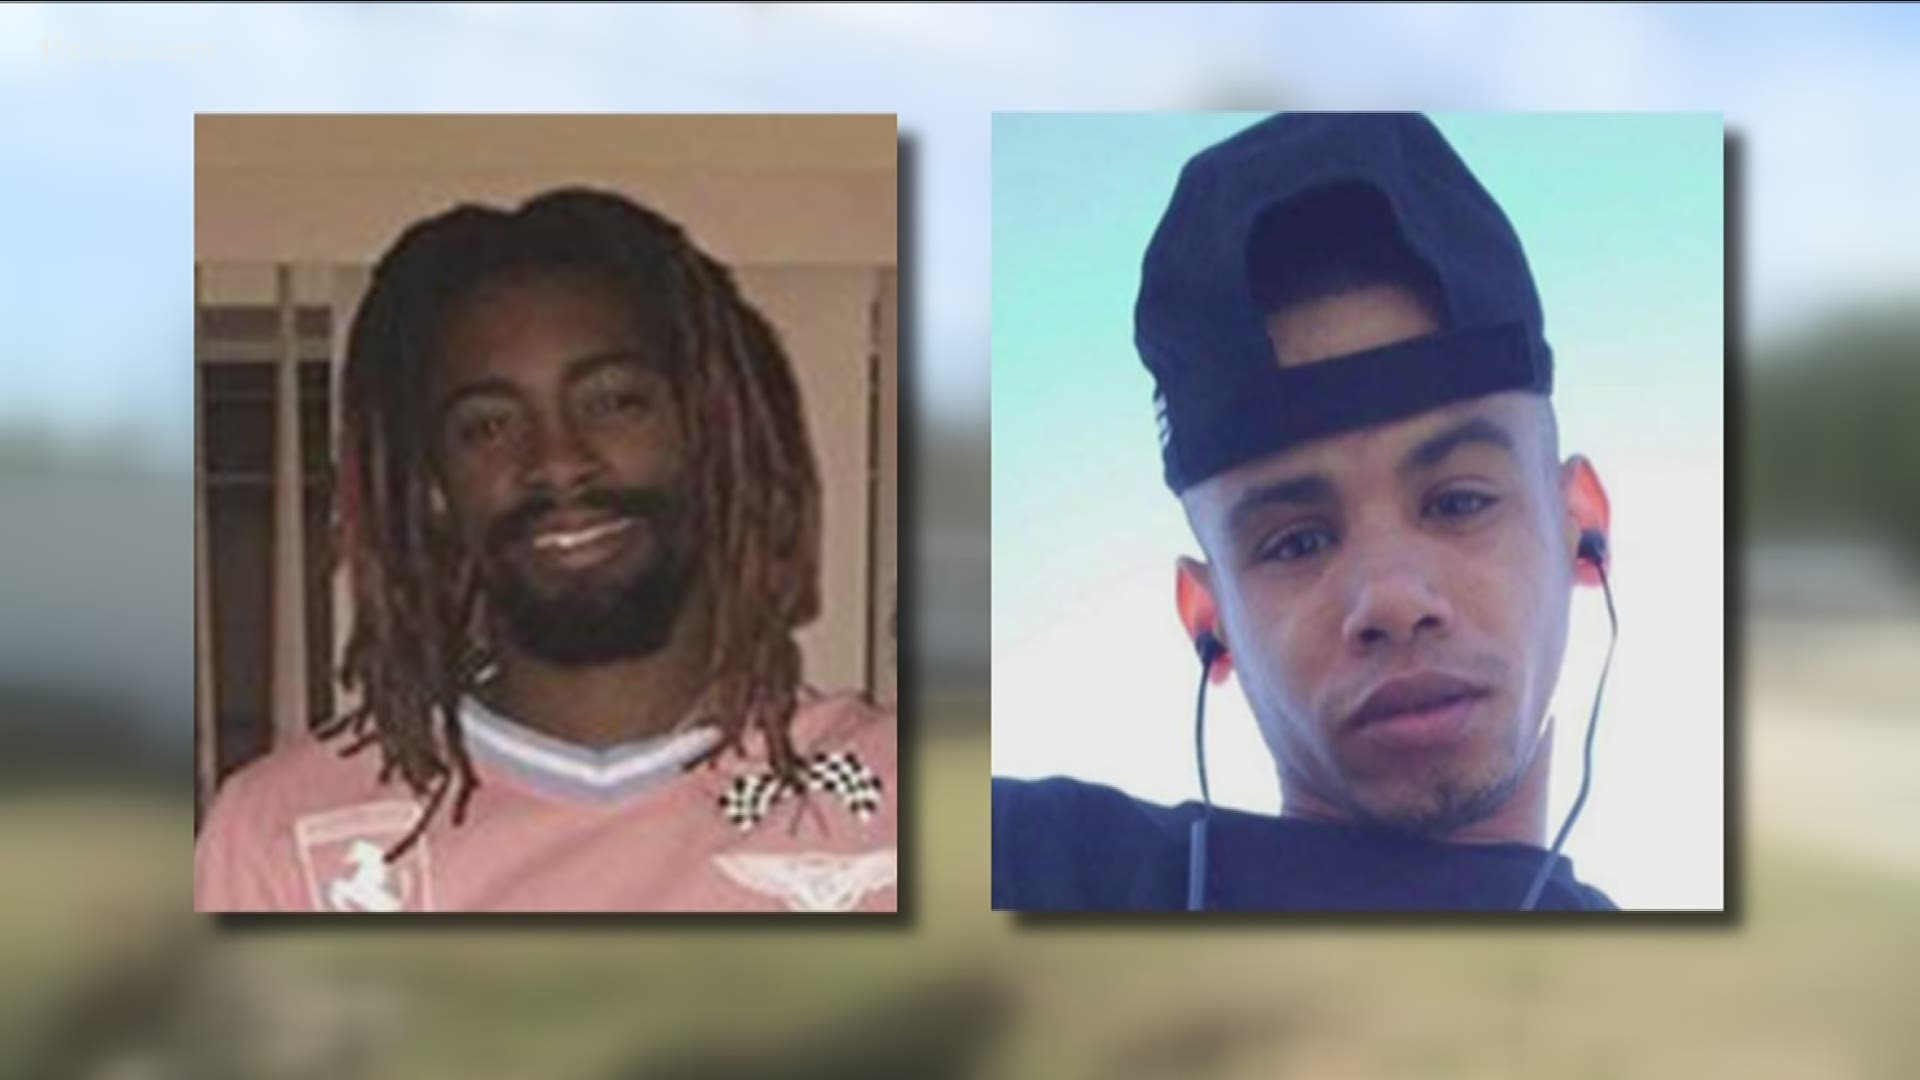 Two suspects have been identified the deaths -- Lesley Green, 30, and Robert Carlisle, 32. Both have been charged with concealing the death of another. While Green is in custody, police are still searching for Carlisle.